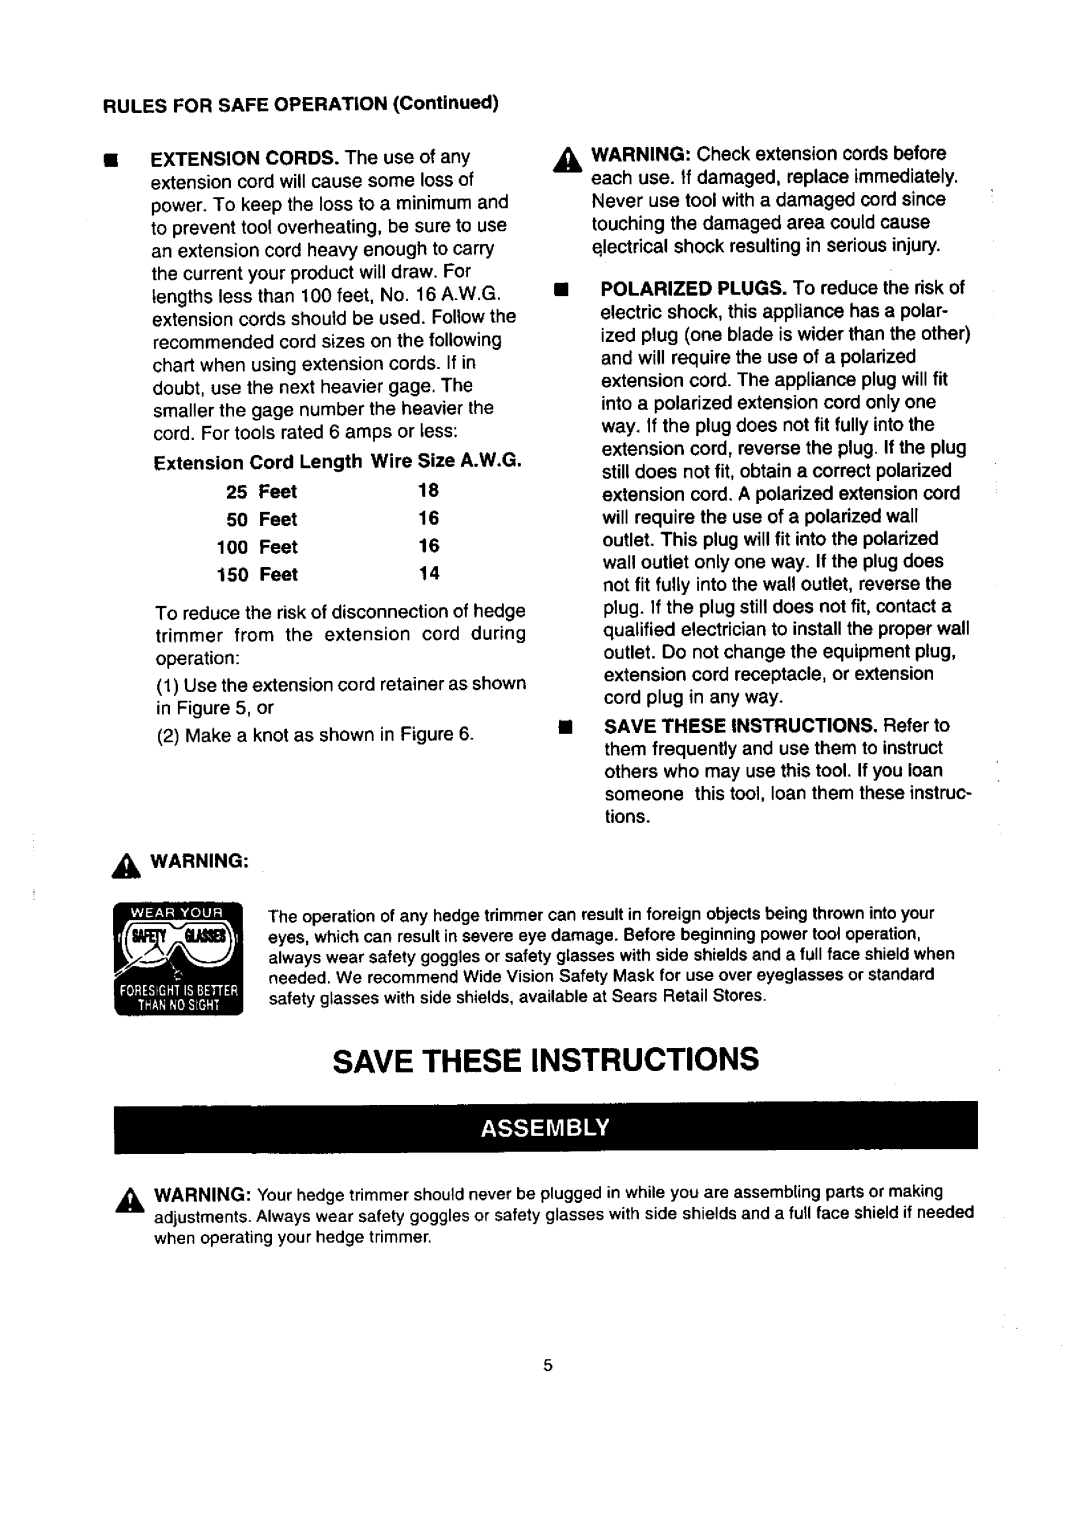 Craftsman 315.79889 owner manual Save These Instructions, RULESFORSAFEOPERATIONContinued, the extension 